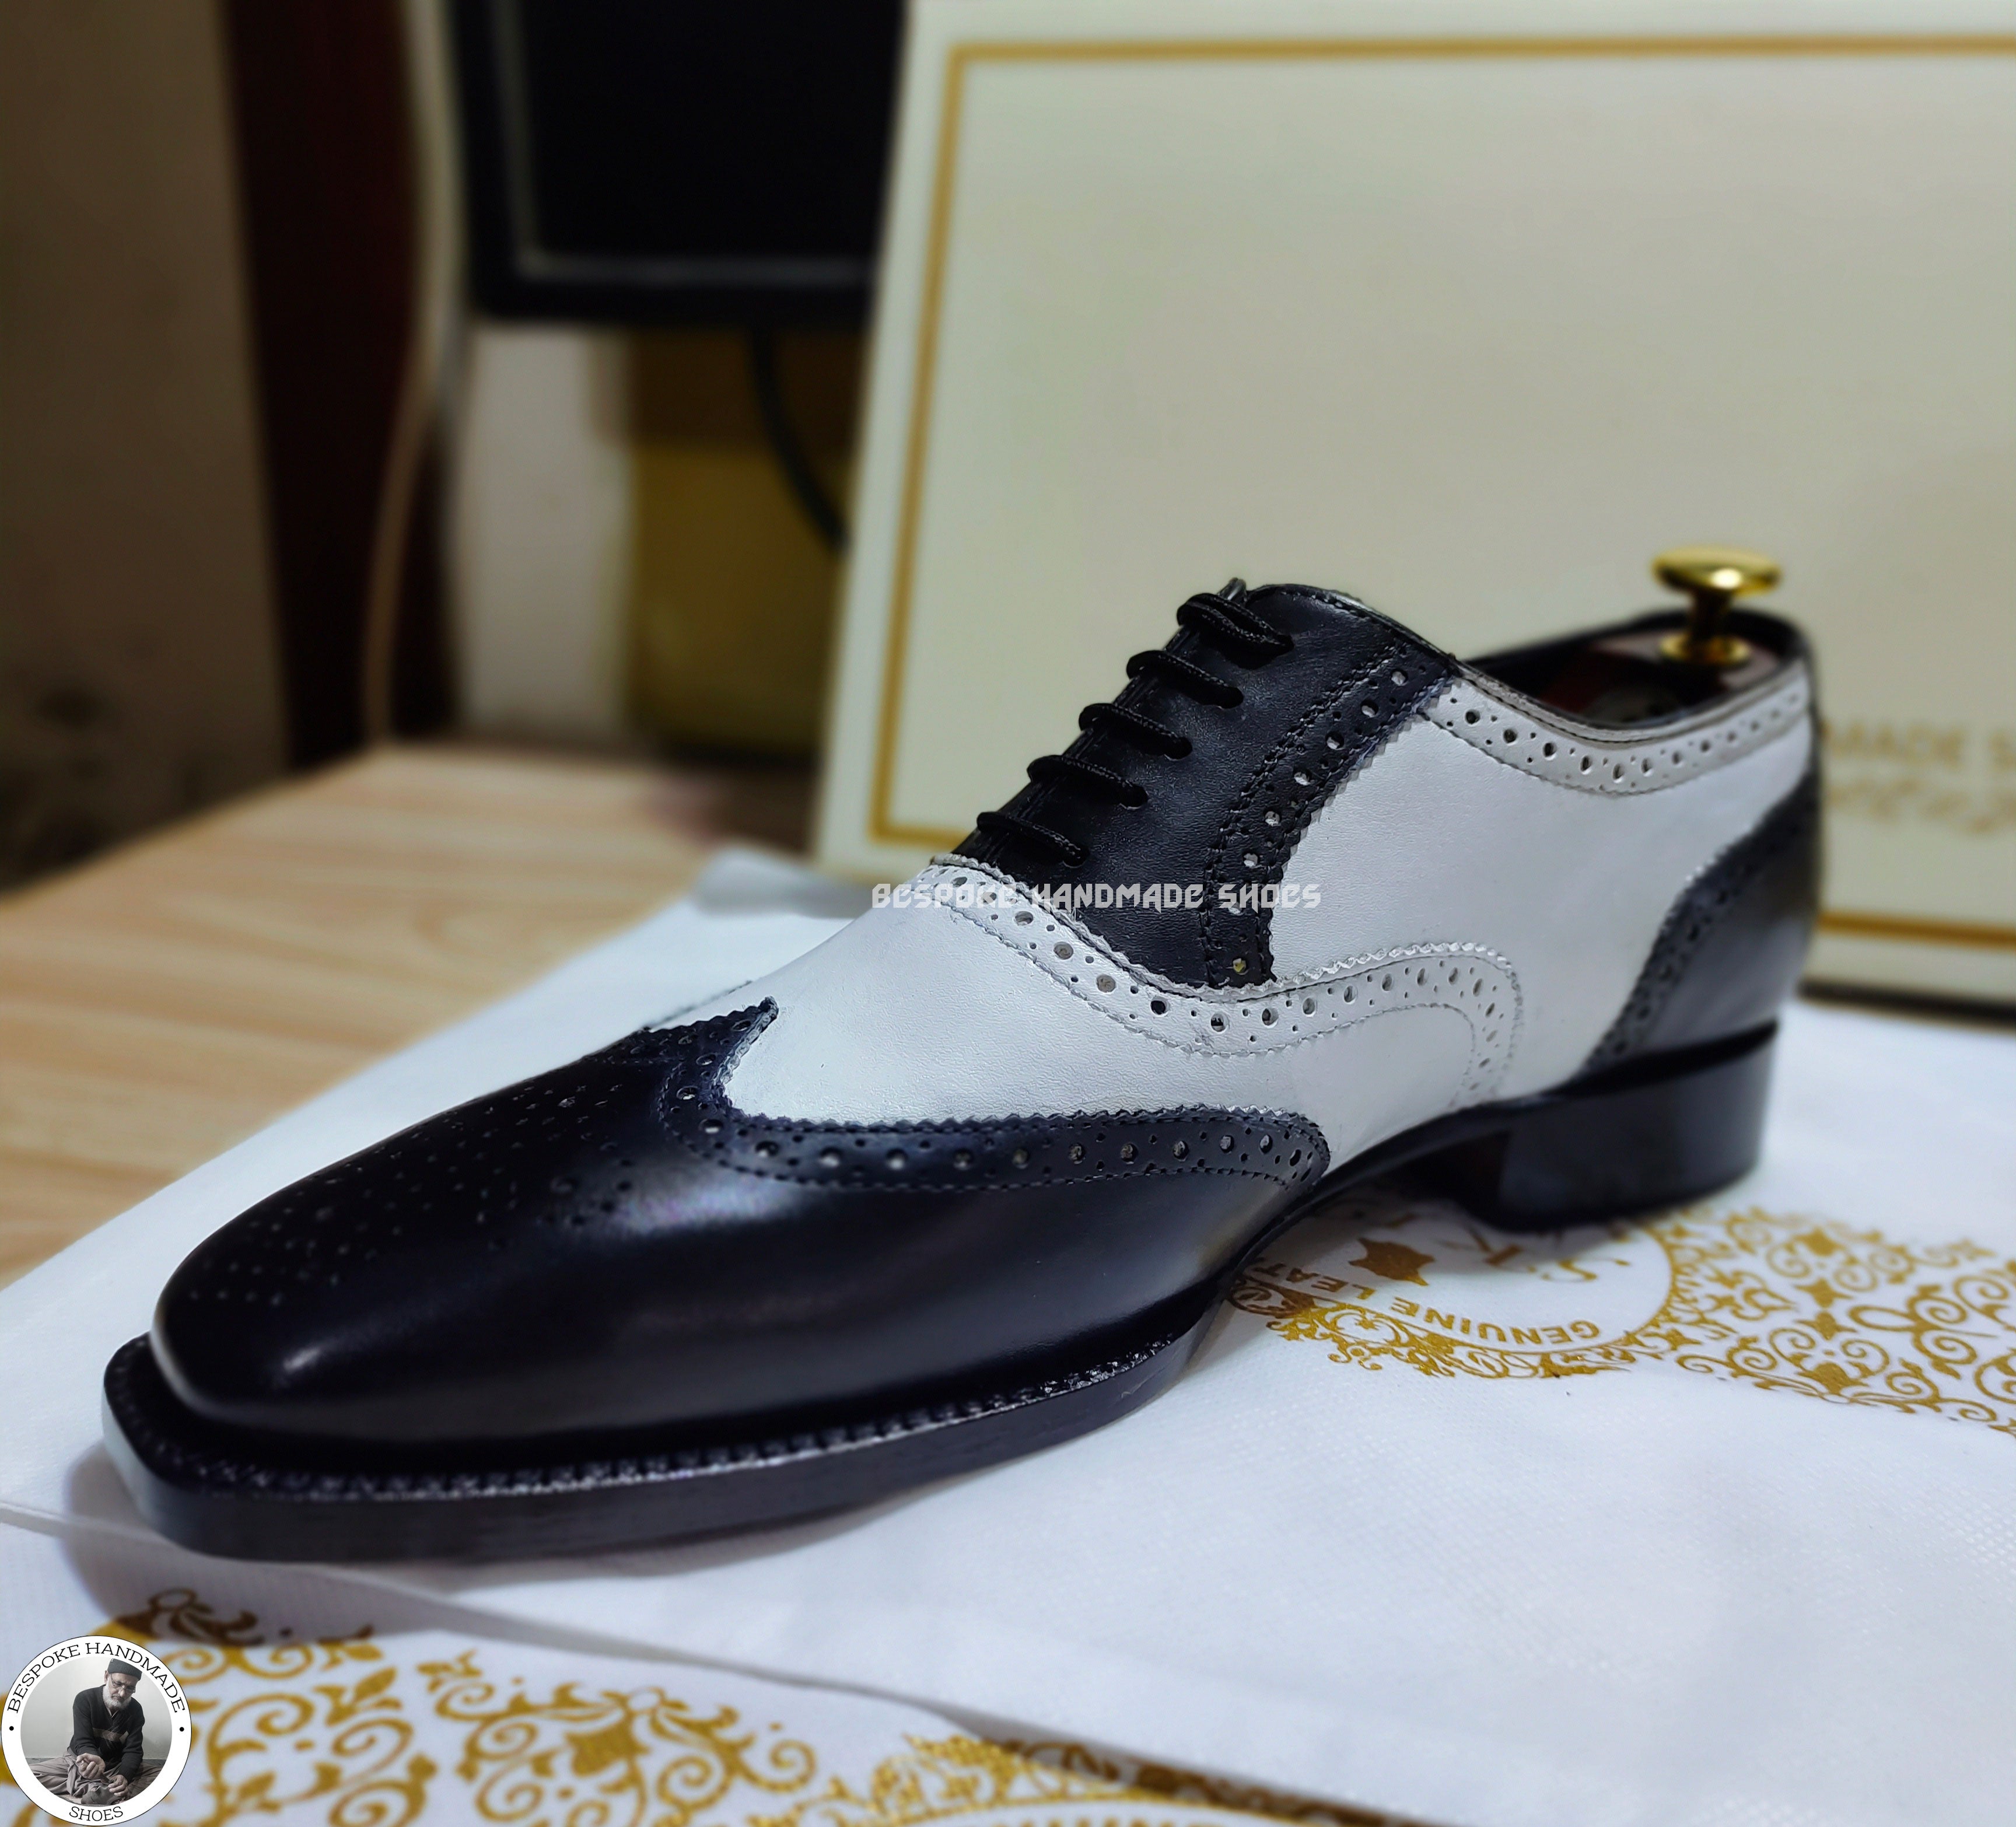 Men's Handmade Leather Shoes, Two Tone Pure White & Black Leather Wingtip Oxford Lace up Dress/Formal Shoe